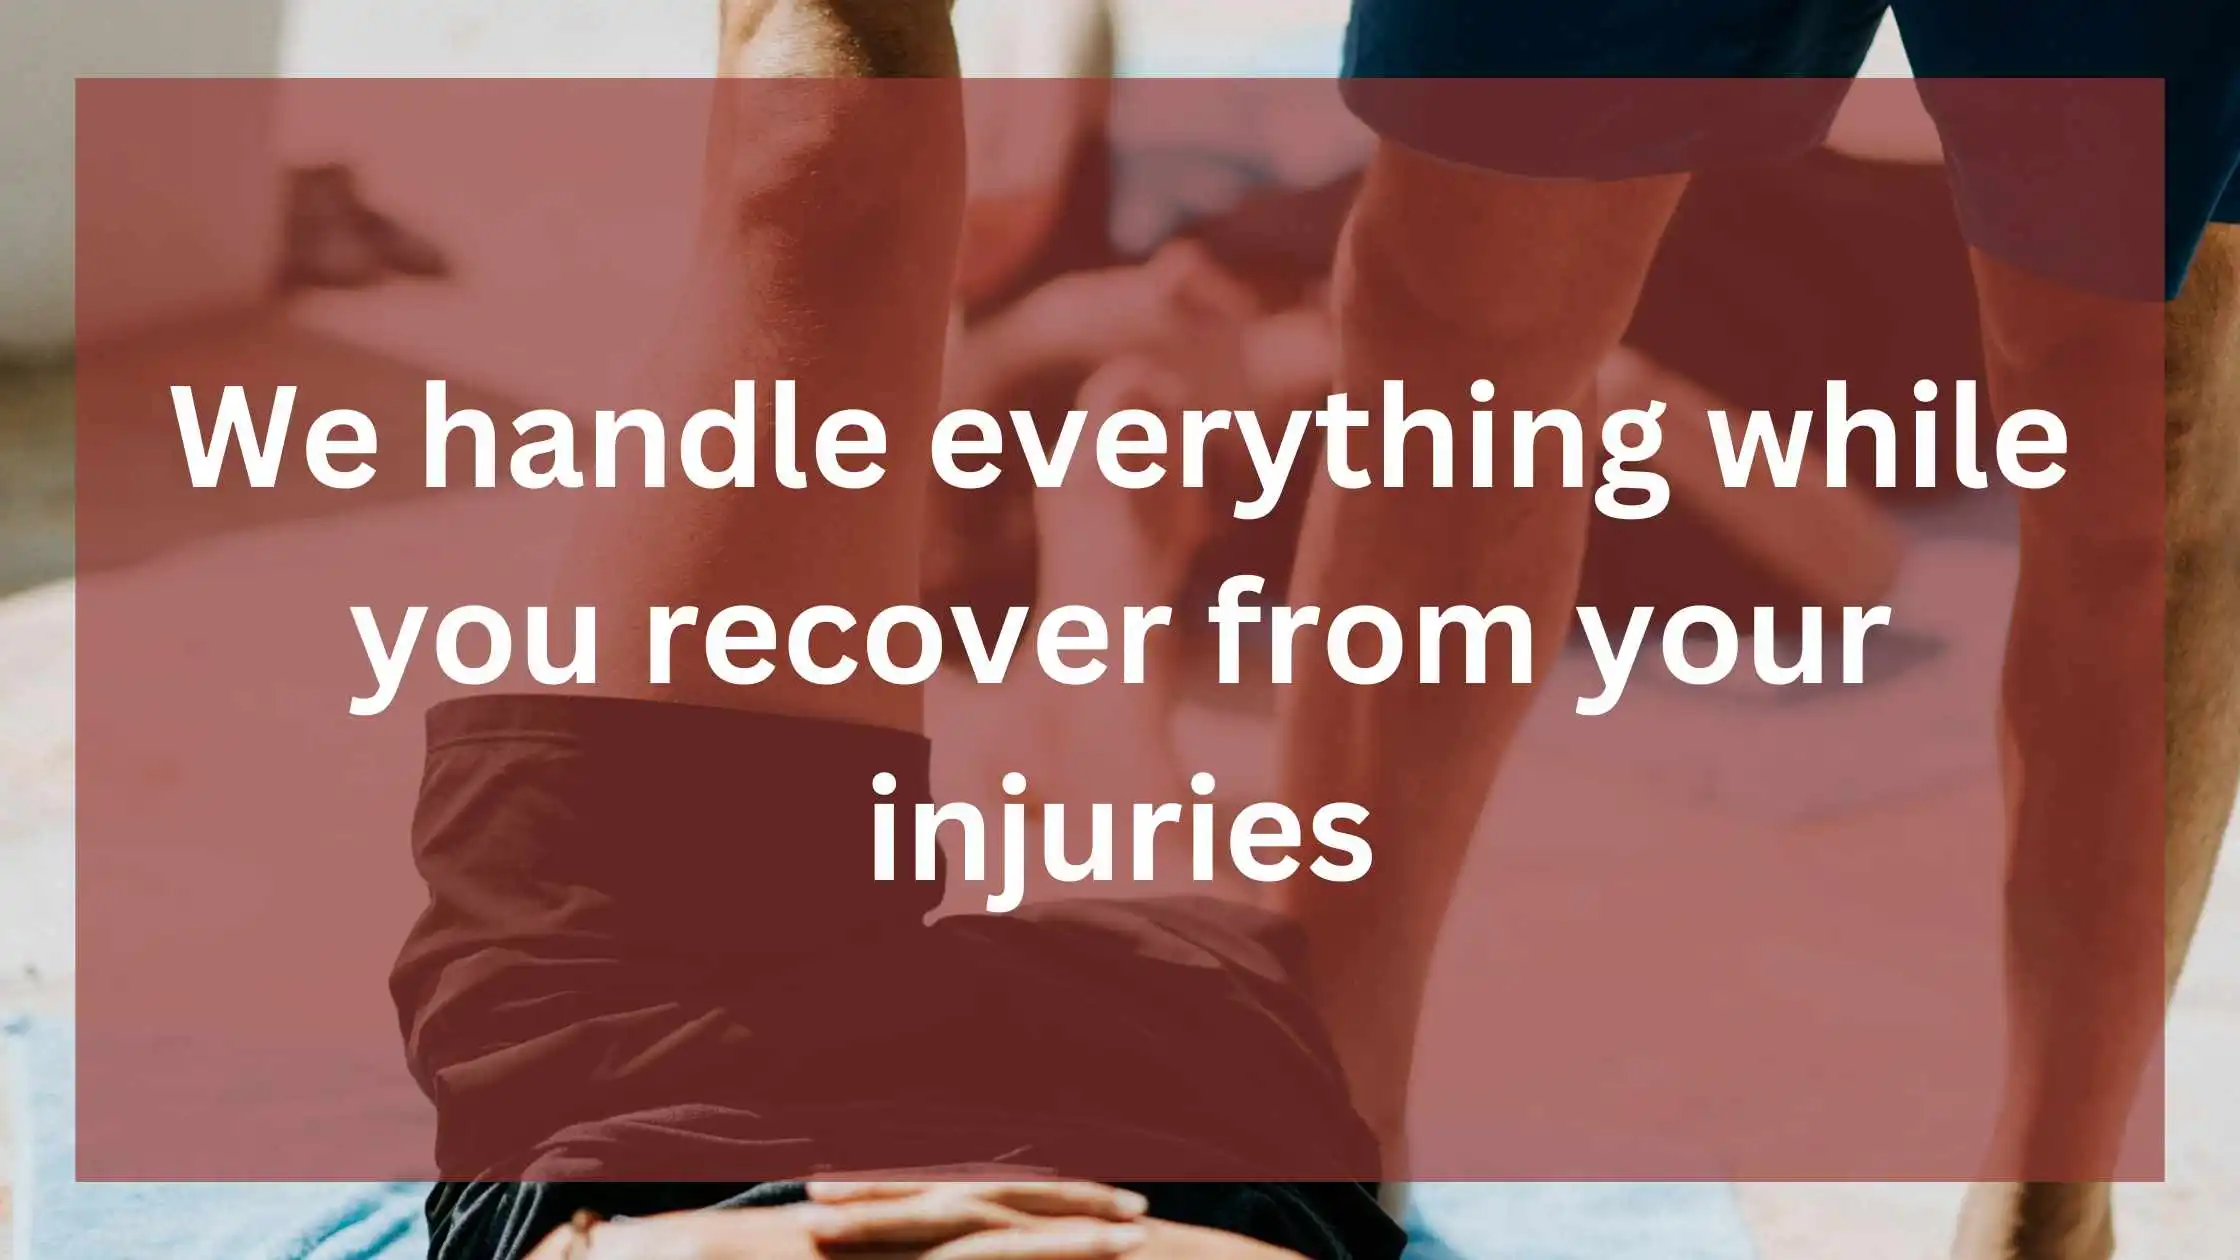 We handle everything while you recover from your injuries